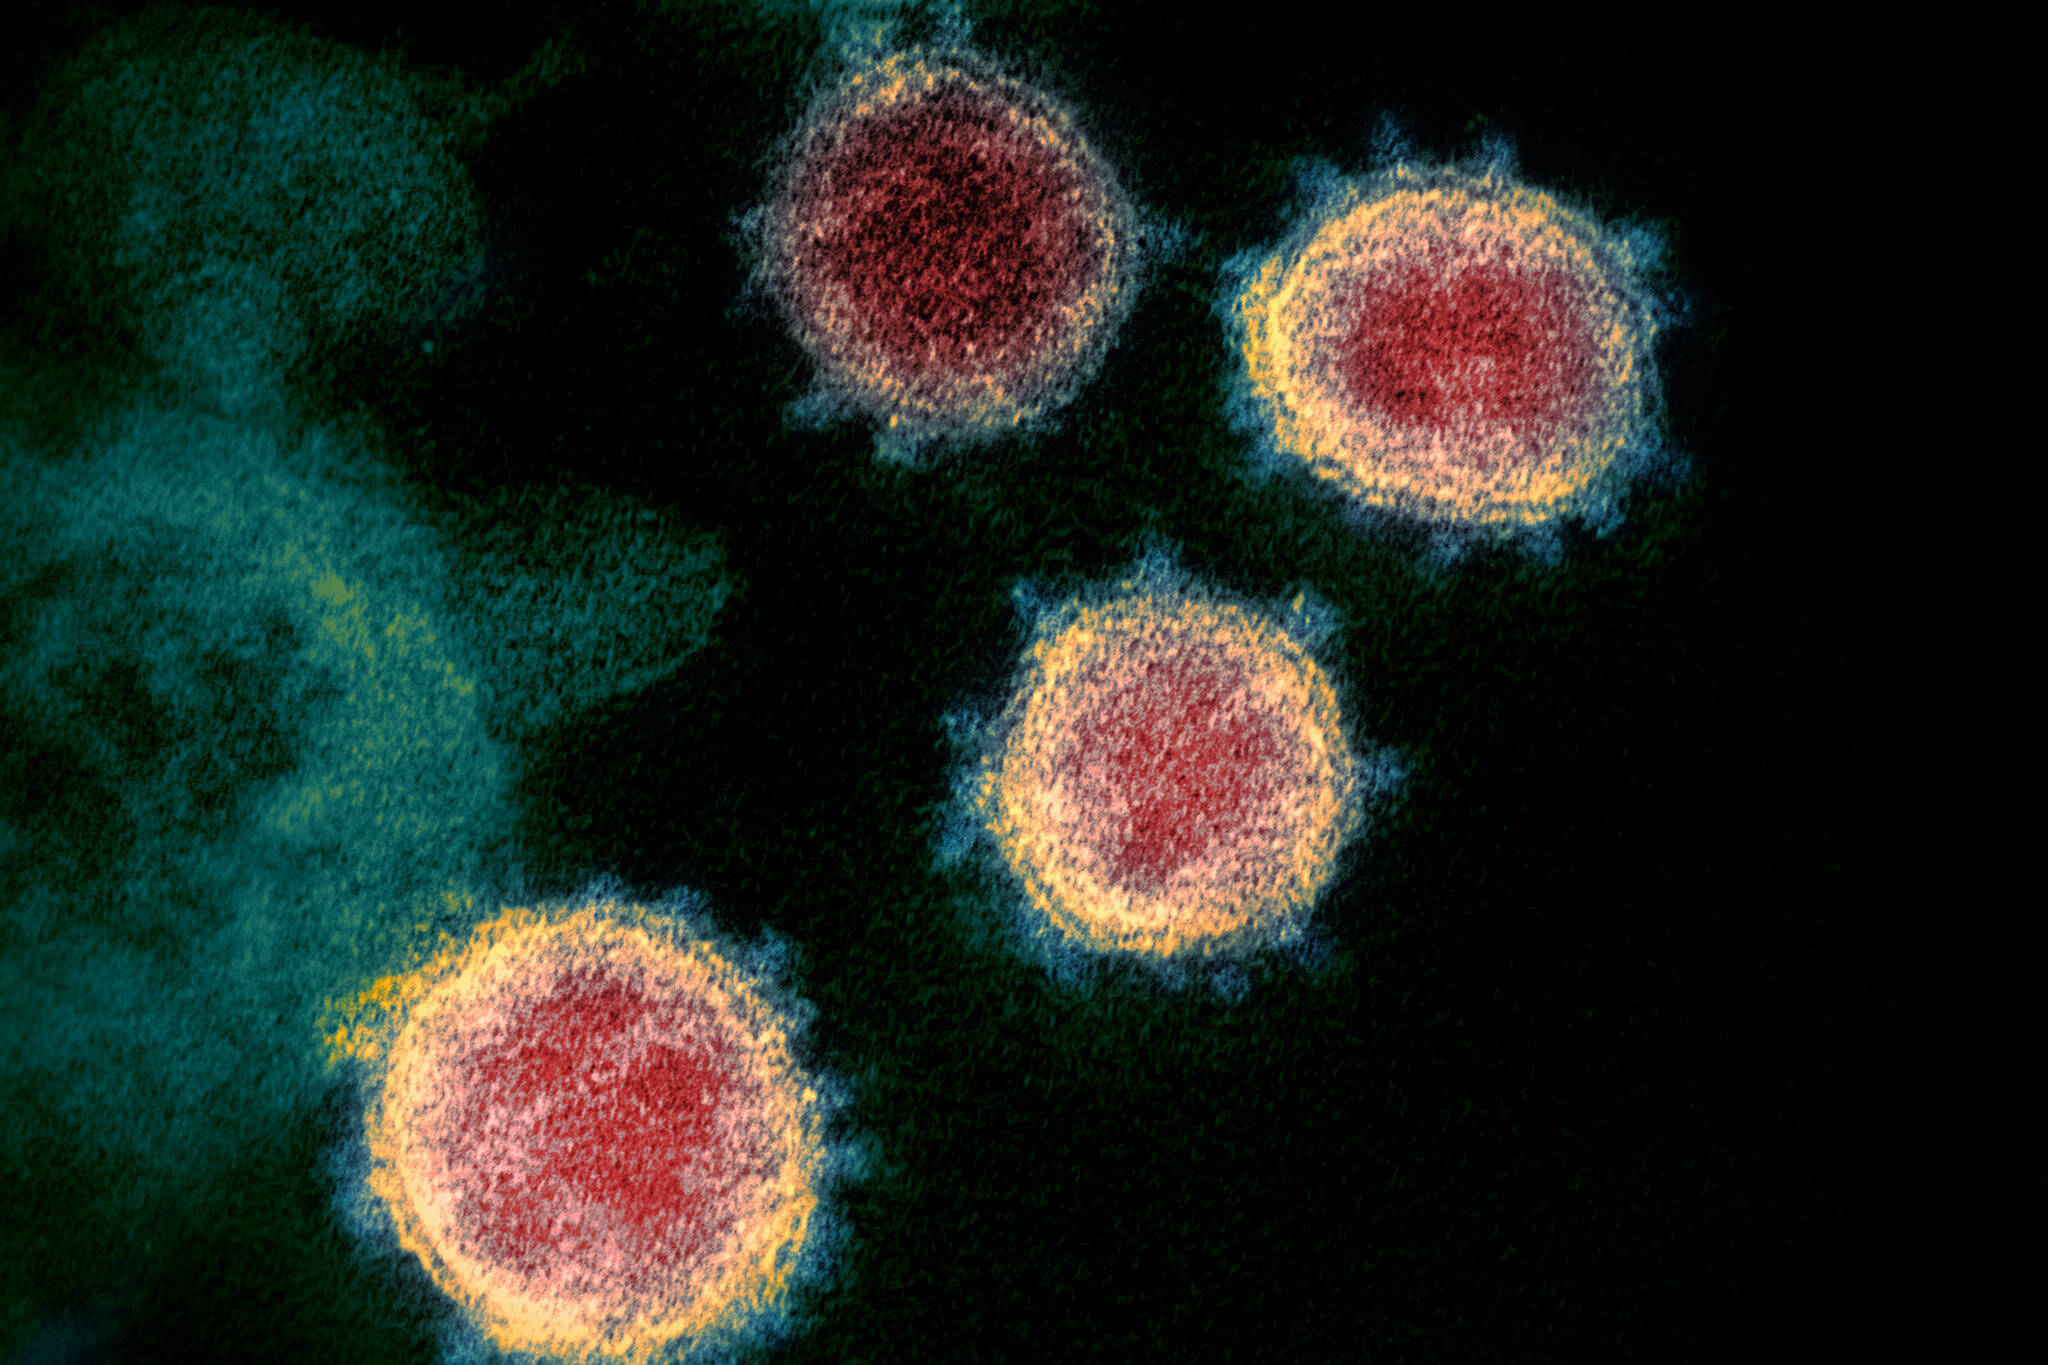 This undated electron microscope image made available by the U.S. National Institutes of Health in February 2020 shows the virus that causes COVID-19. Monoclonal antibodies may be a good treatment option for some people who test positive for the illness, according to state health officials. However, vaccination remains the best tool for limiting spread of COVID-19 and limiting hospitalizations. (NIAID-RML via AP, File)